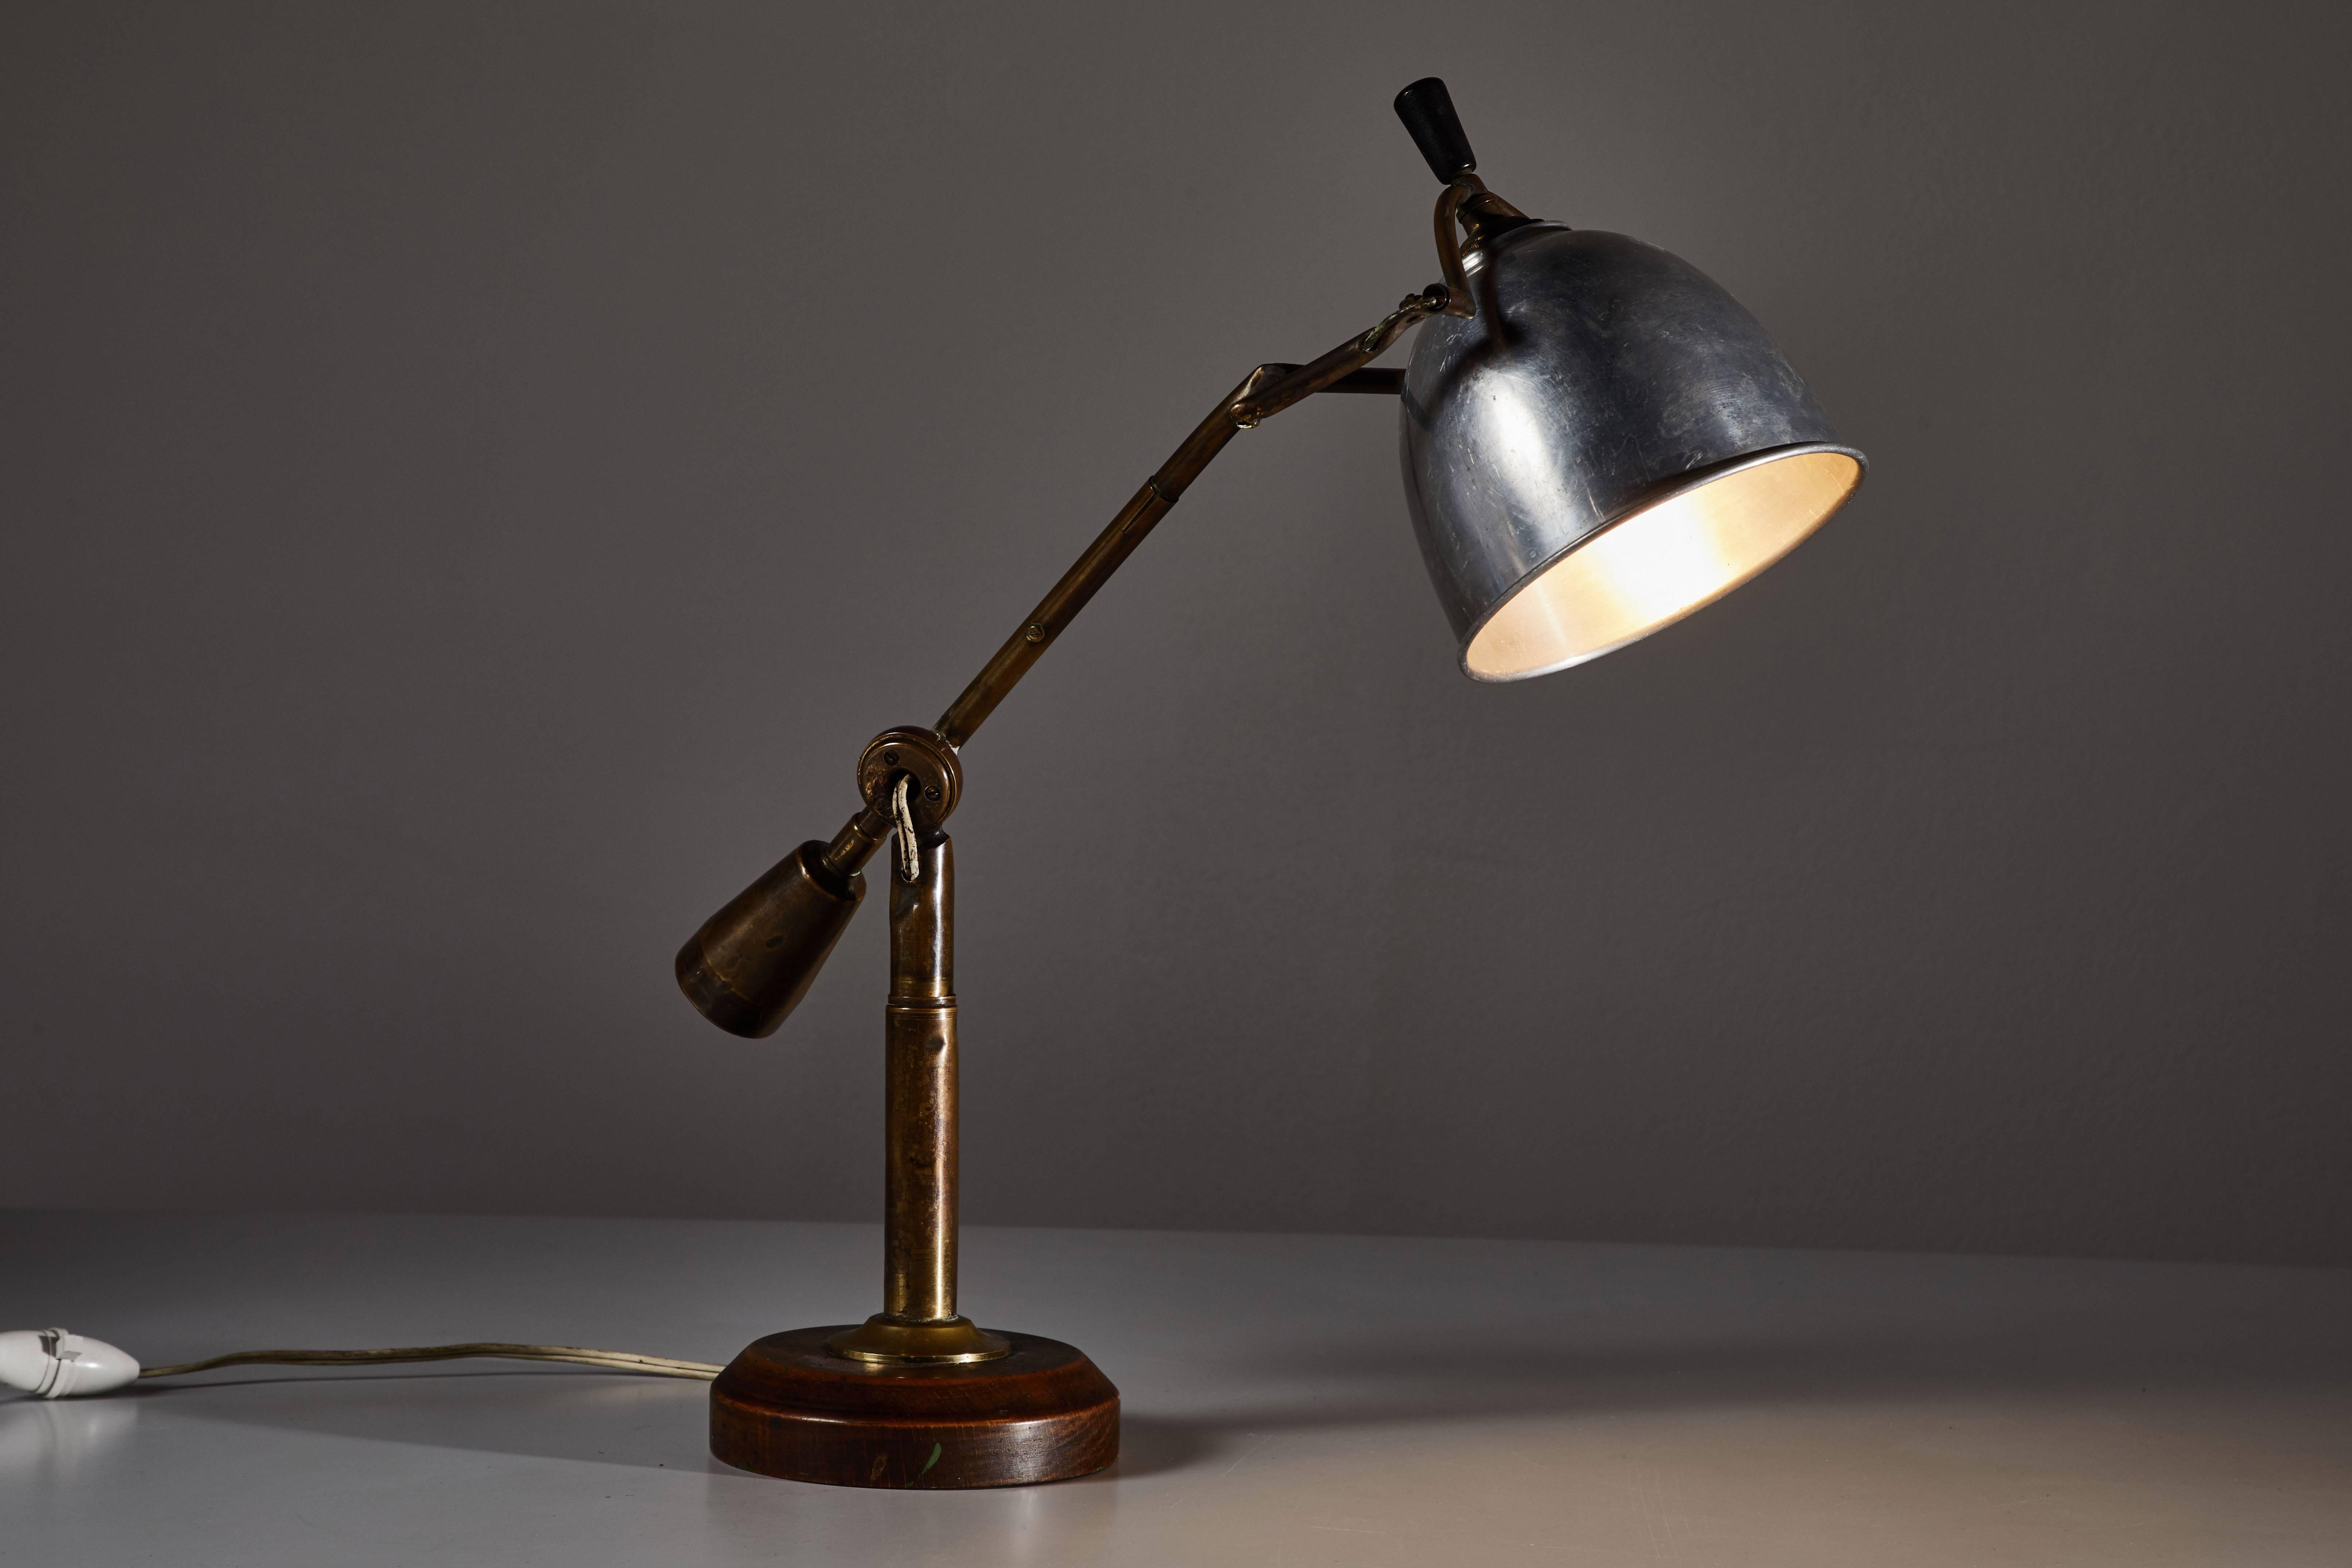 Iconic Table Lamp by Edouard - Wilfred Buquet designed in France circa 1930's. Articulates in several directions with adjustable counterweight. Aluminum shade and nickel plated brass hardware with wooden base. Retains original signed applied metal